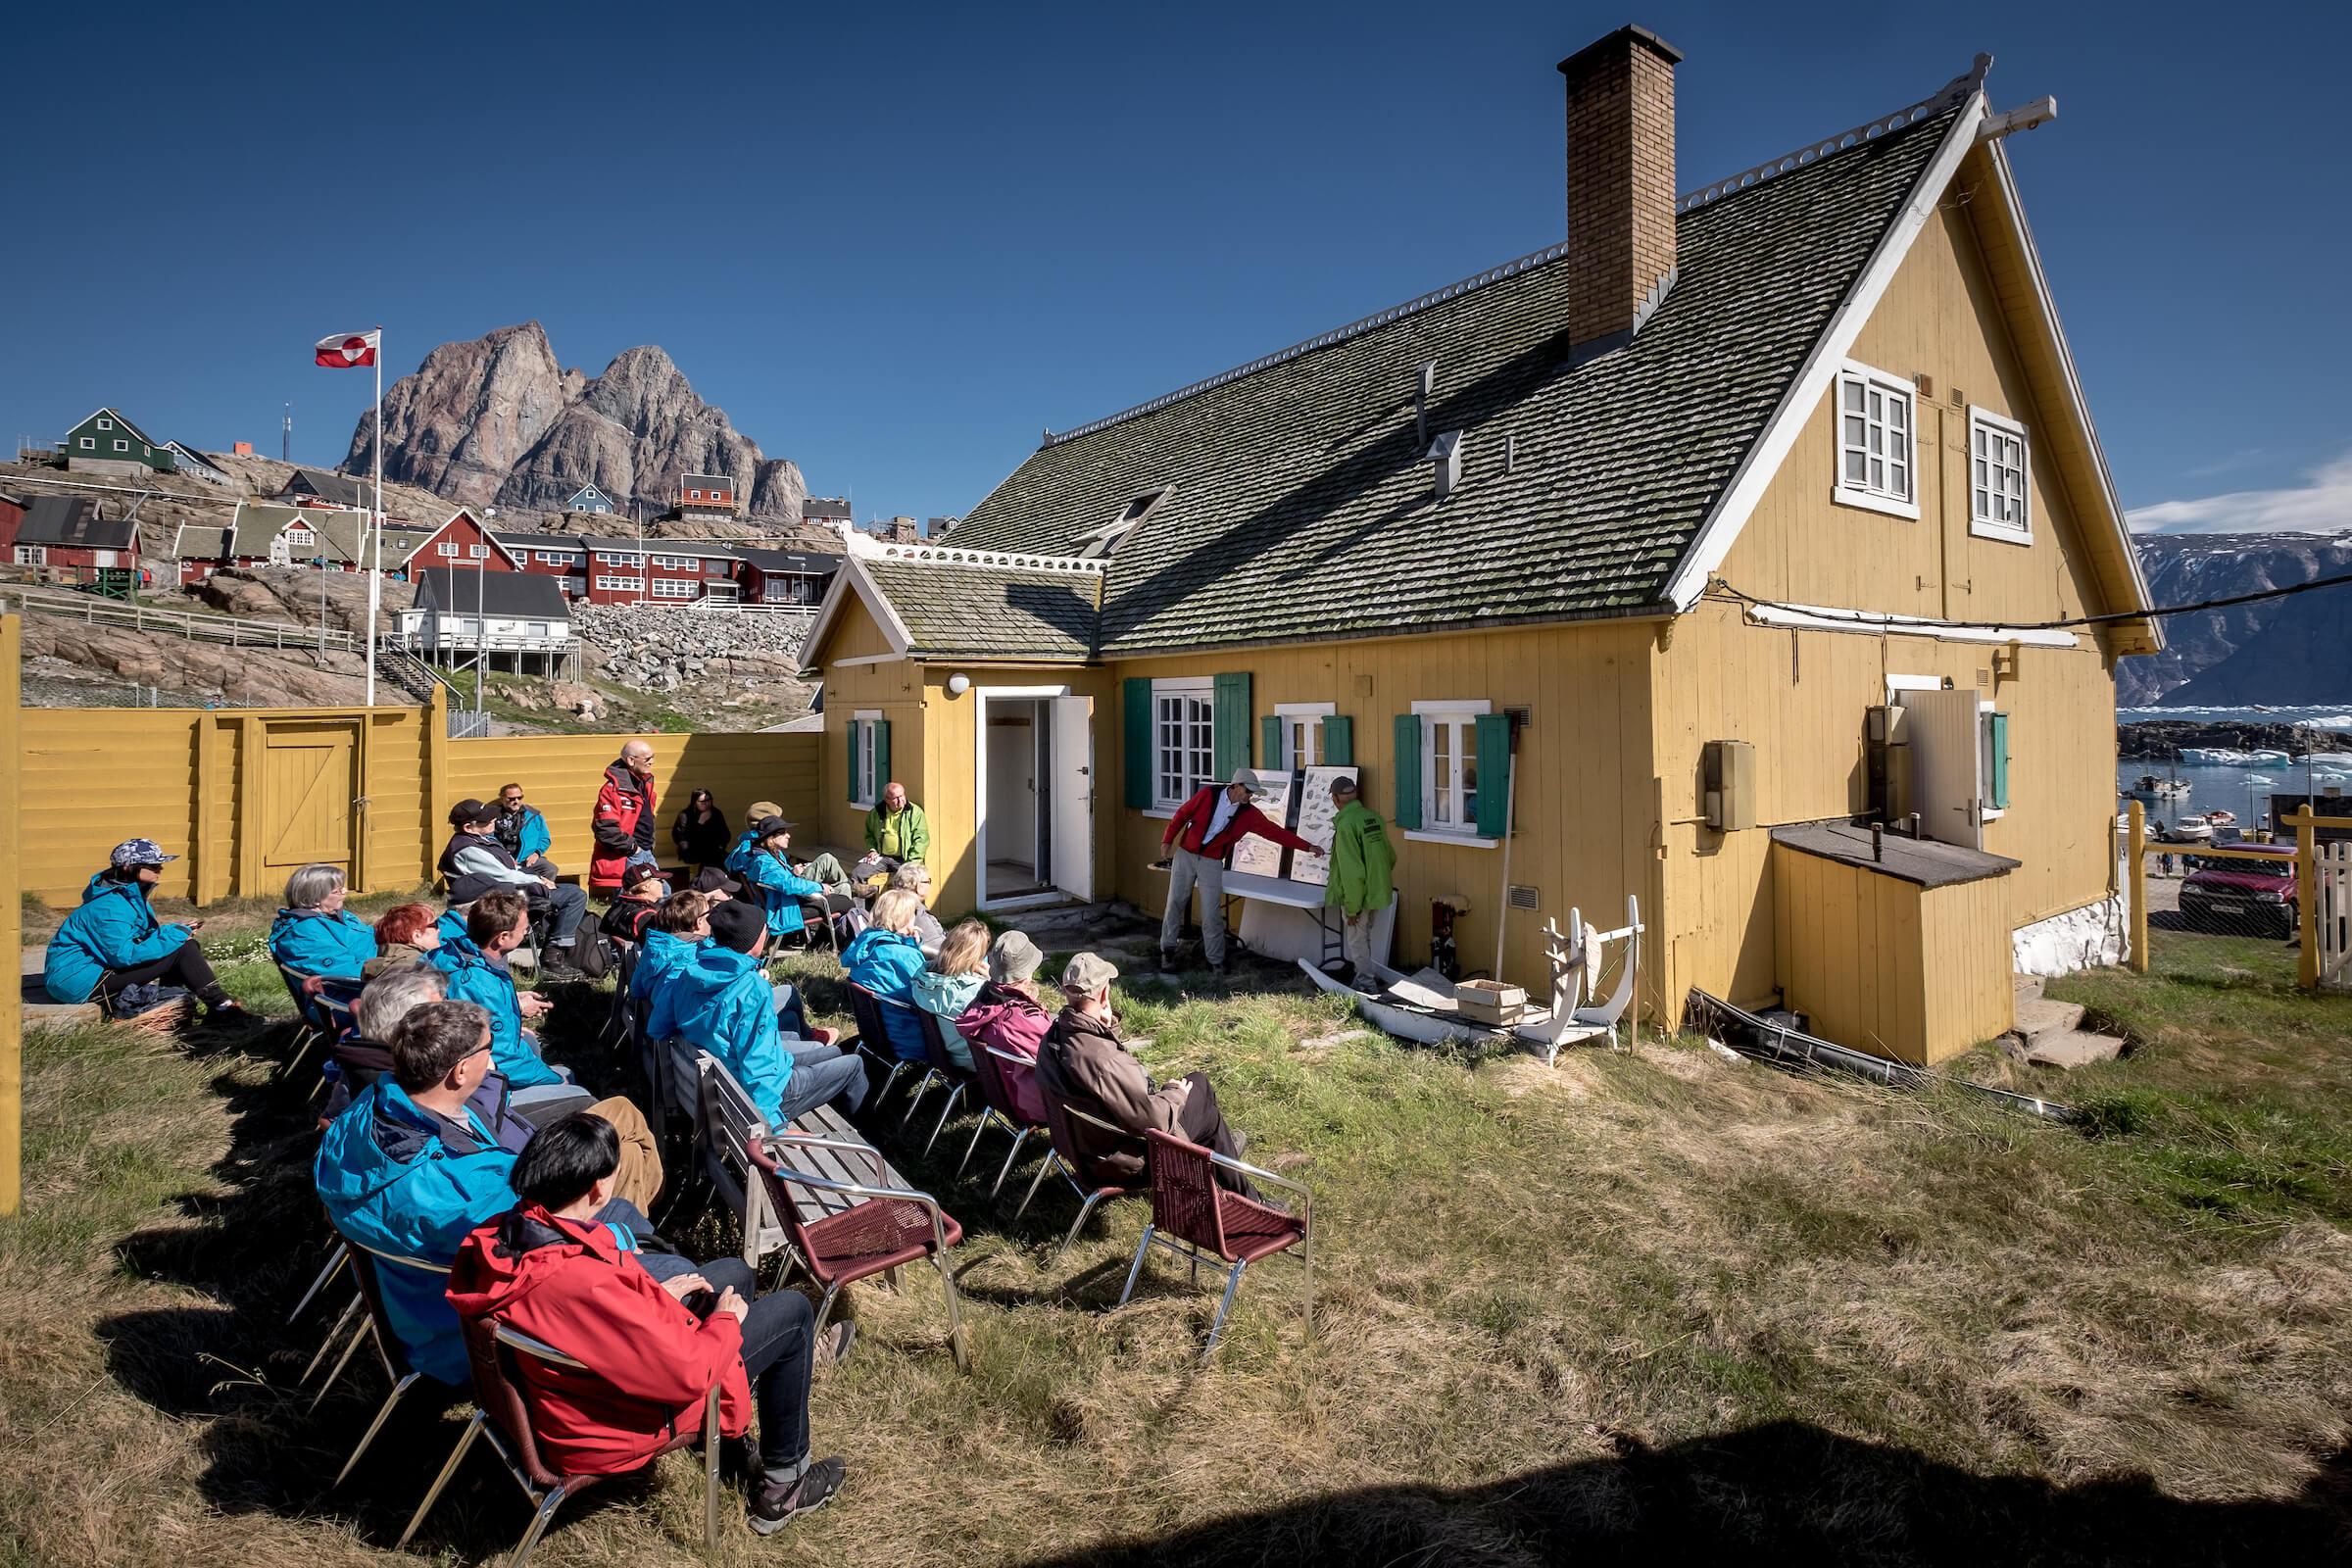 A presentation for MS Fram guests at the Uummannaq museum in Greenland